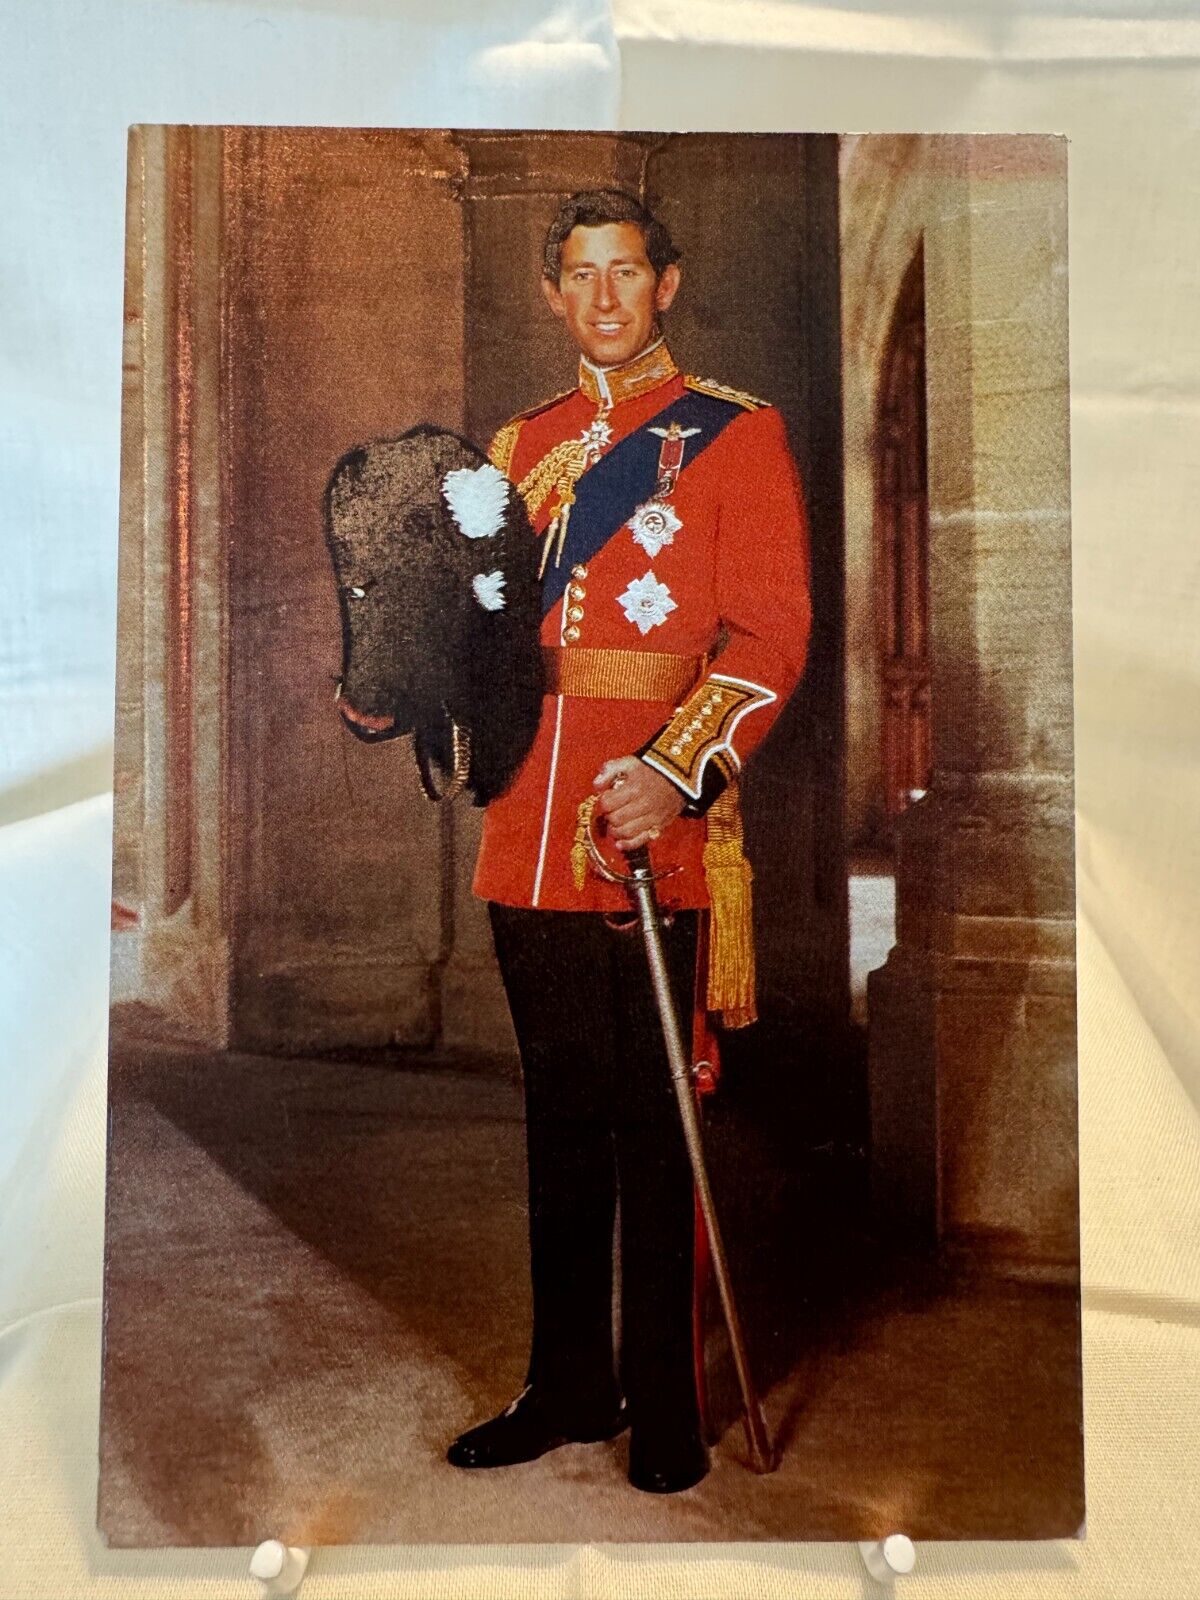 H.R.H. PRINCE CHARLES (date unknown) - COLOR POSTCARD -  EXCELLENT CONDITION